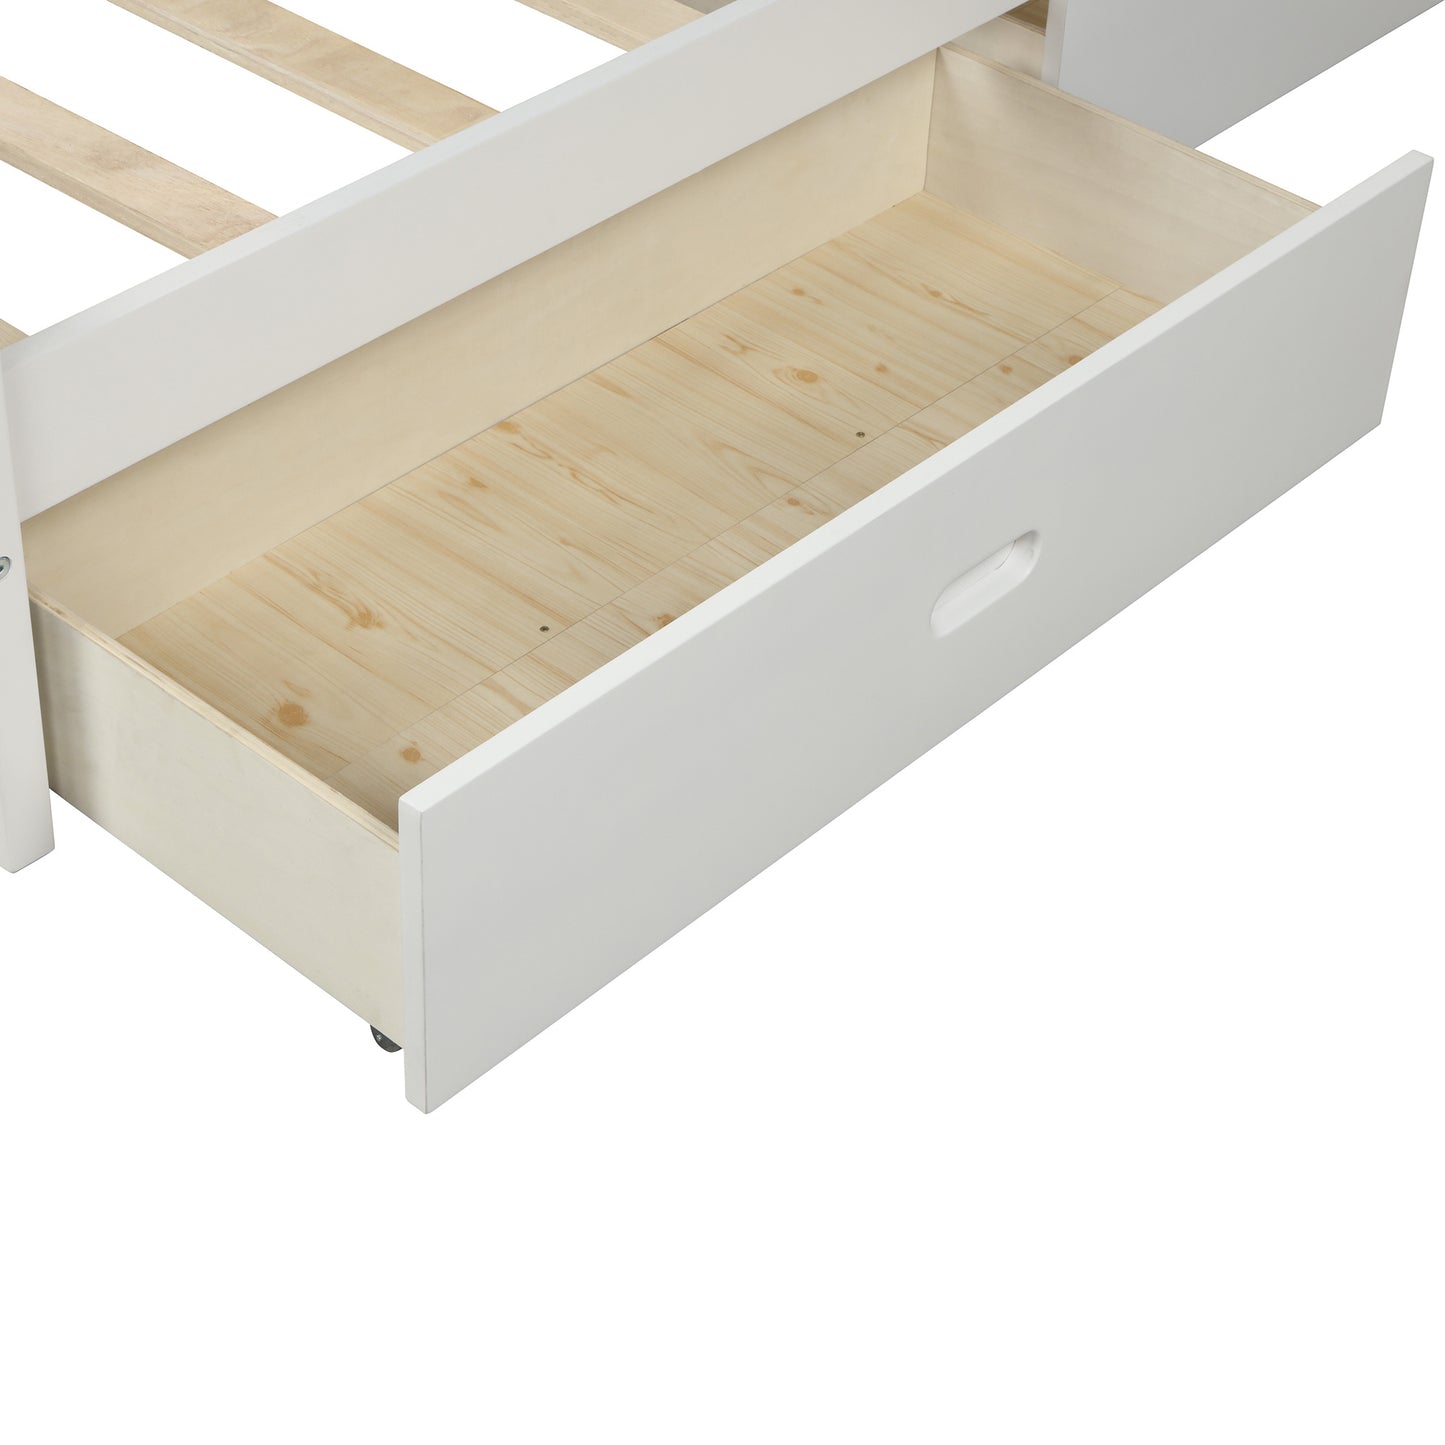 Full Size Bed Frame with Storage